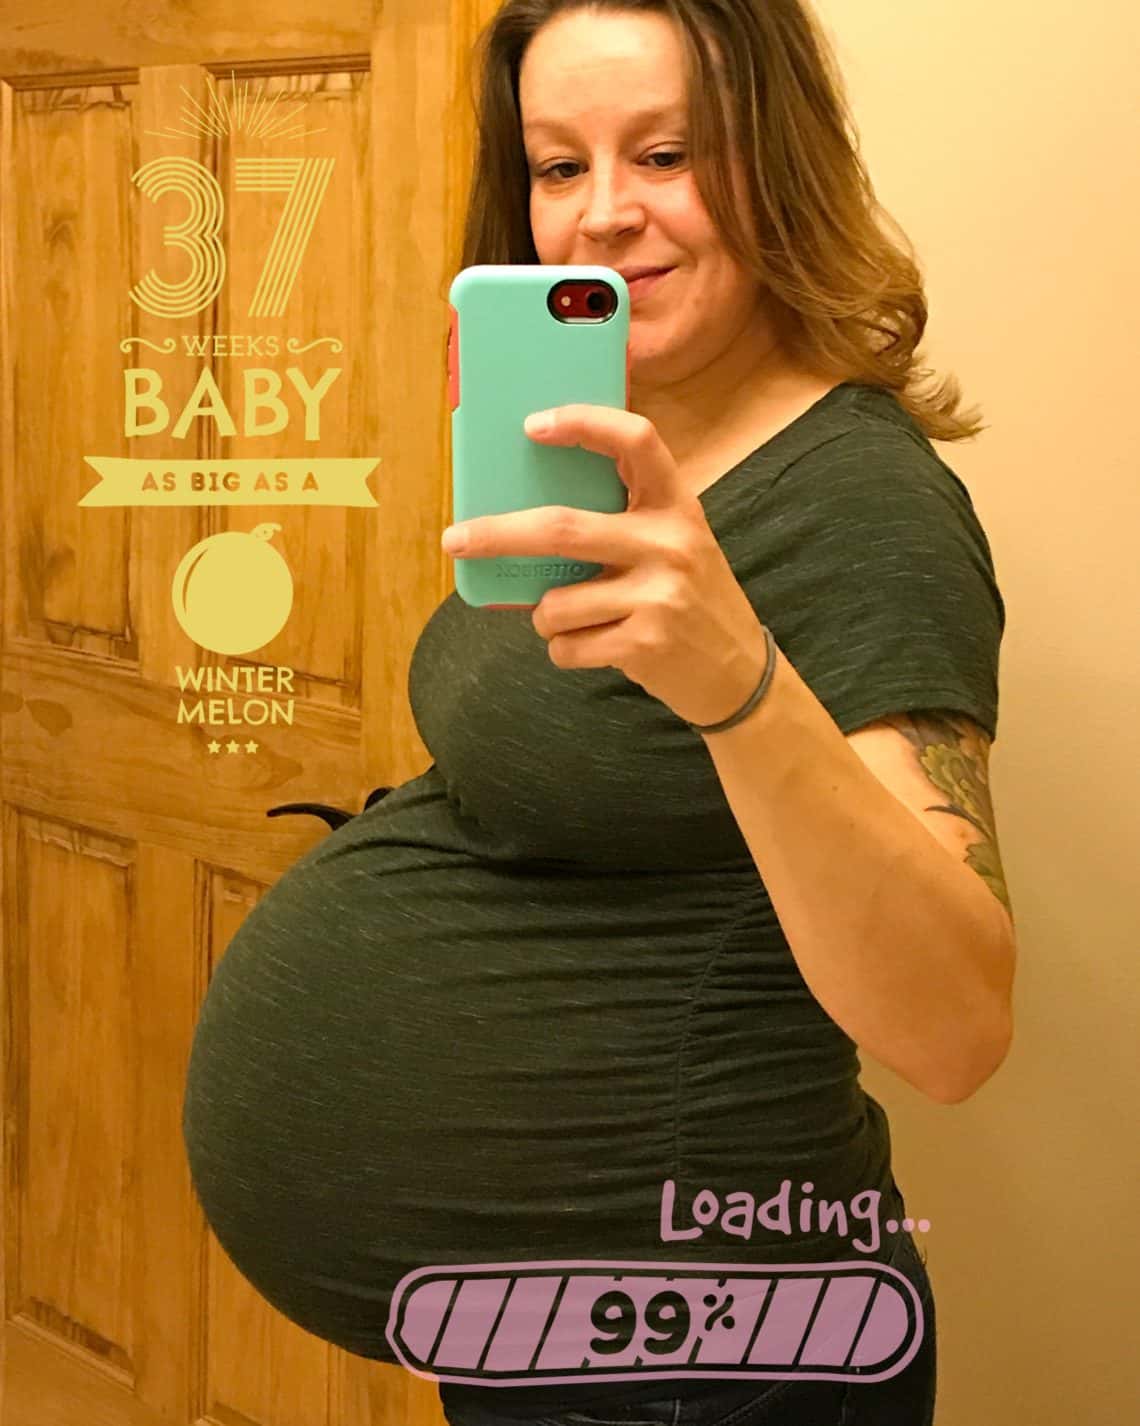 37 Weeks Pregnant with Twins Tips, Advice & How to Prep Twiniversity